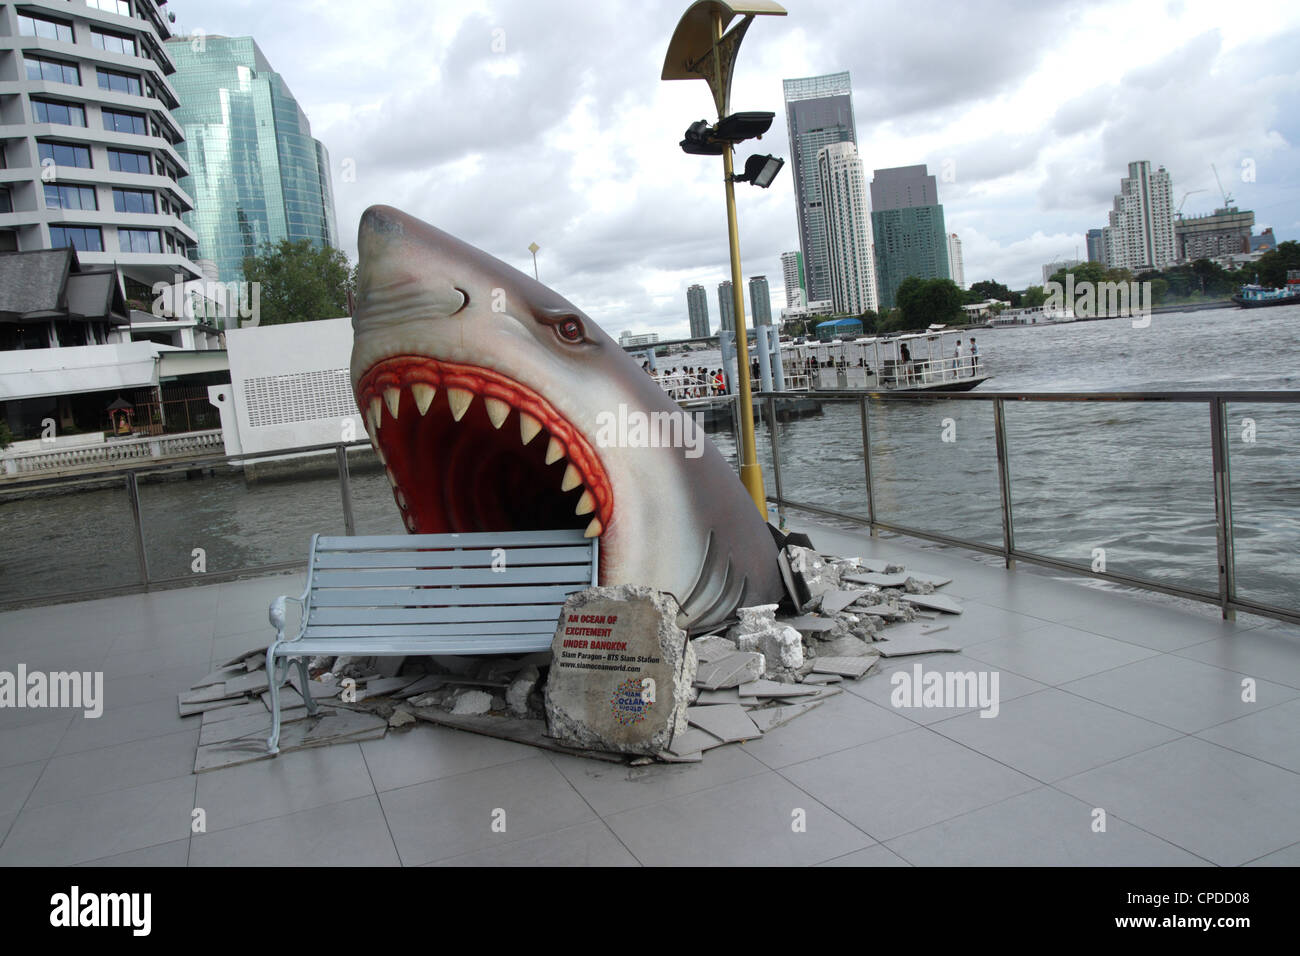 Giant white shark statue display near a bench in a shopping mall on Cha phraya river Stock Photo